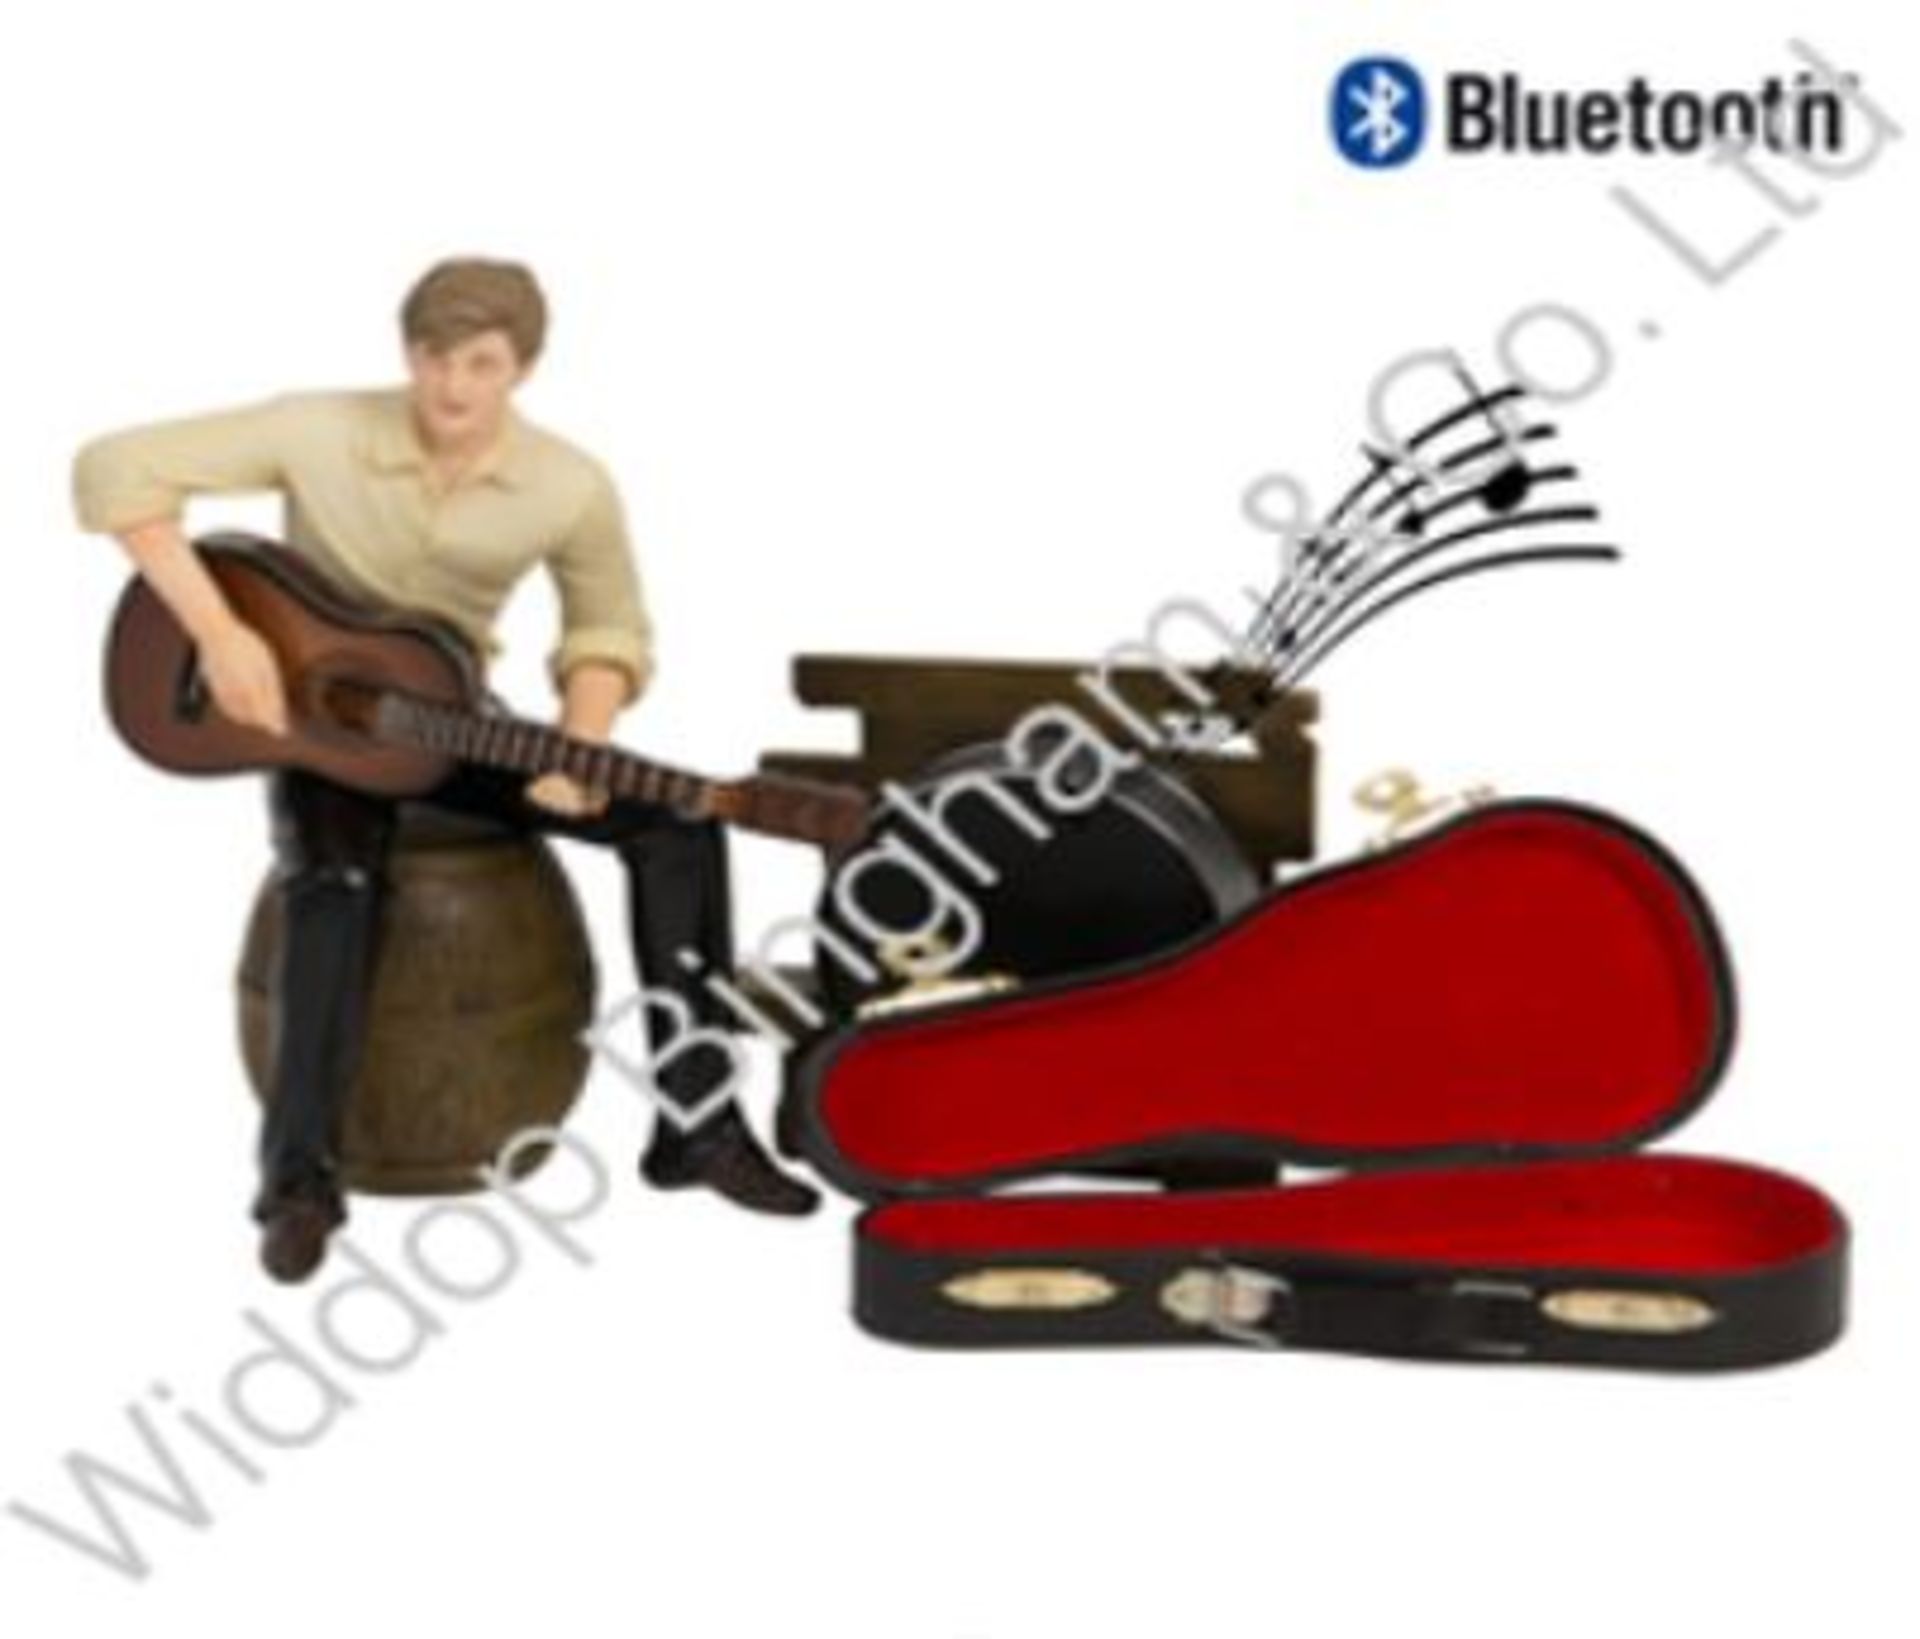 Boxed Musicology Guitar Figurine With Bluetooth Speaker Also Includes USB Cable RRP £90